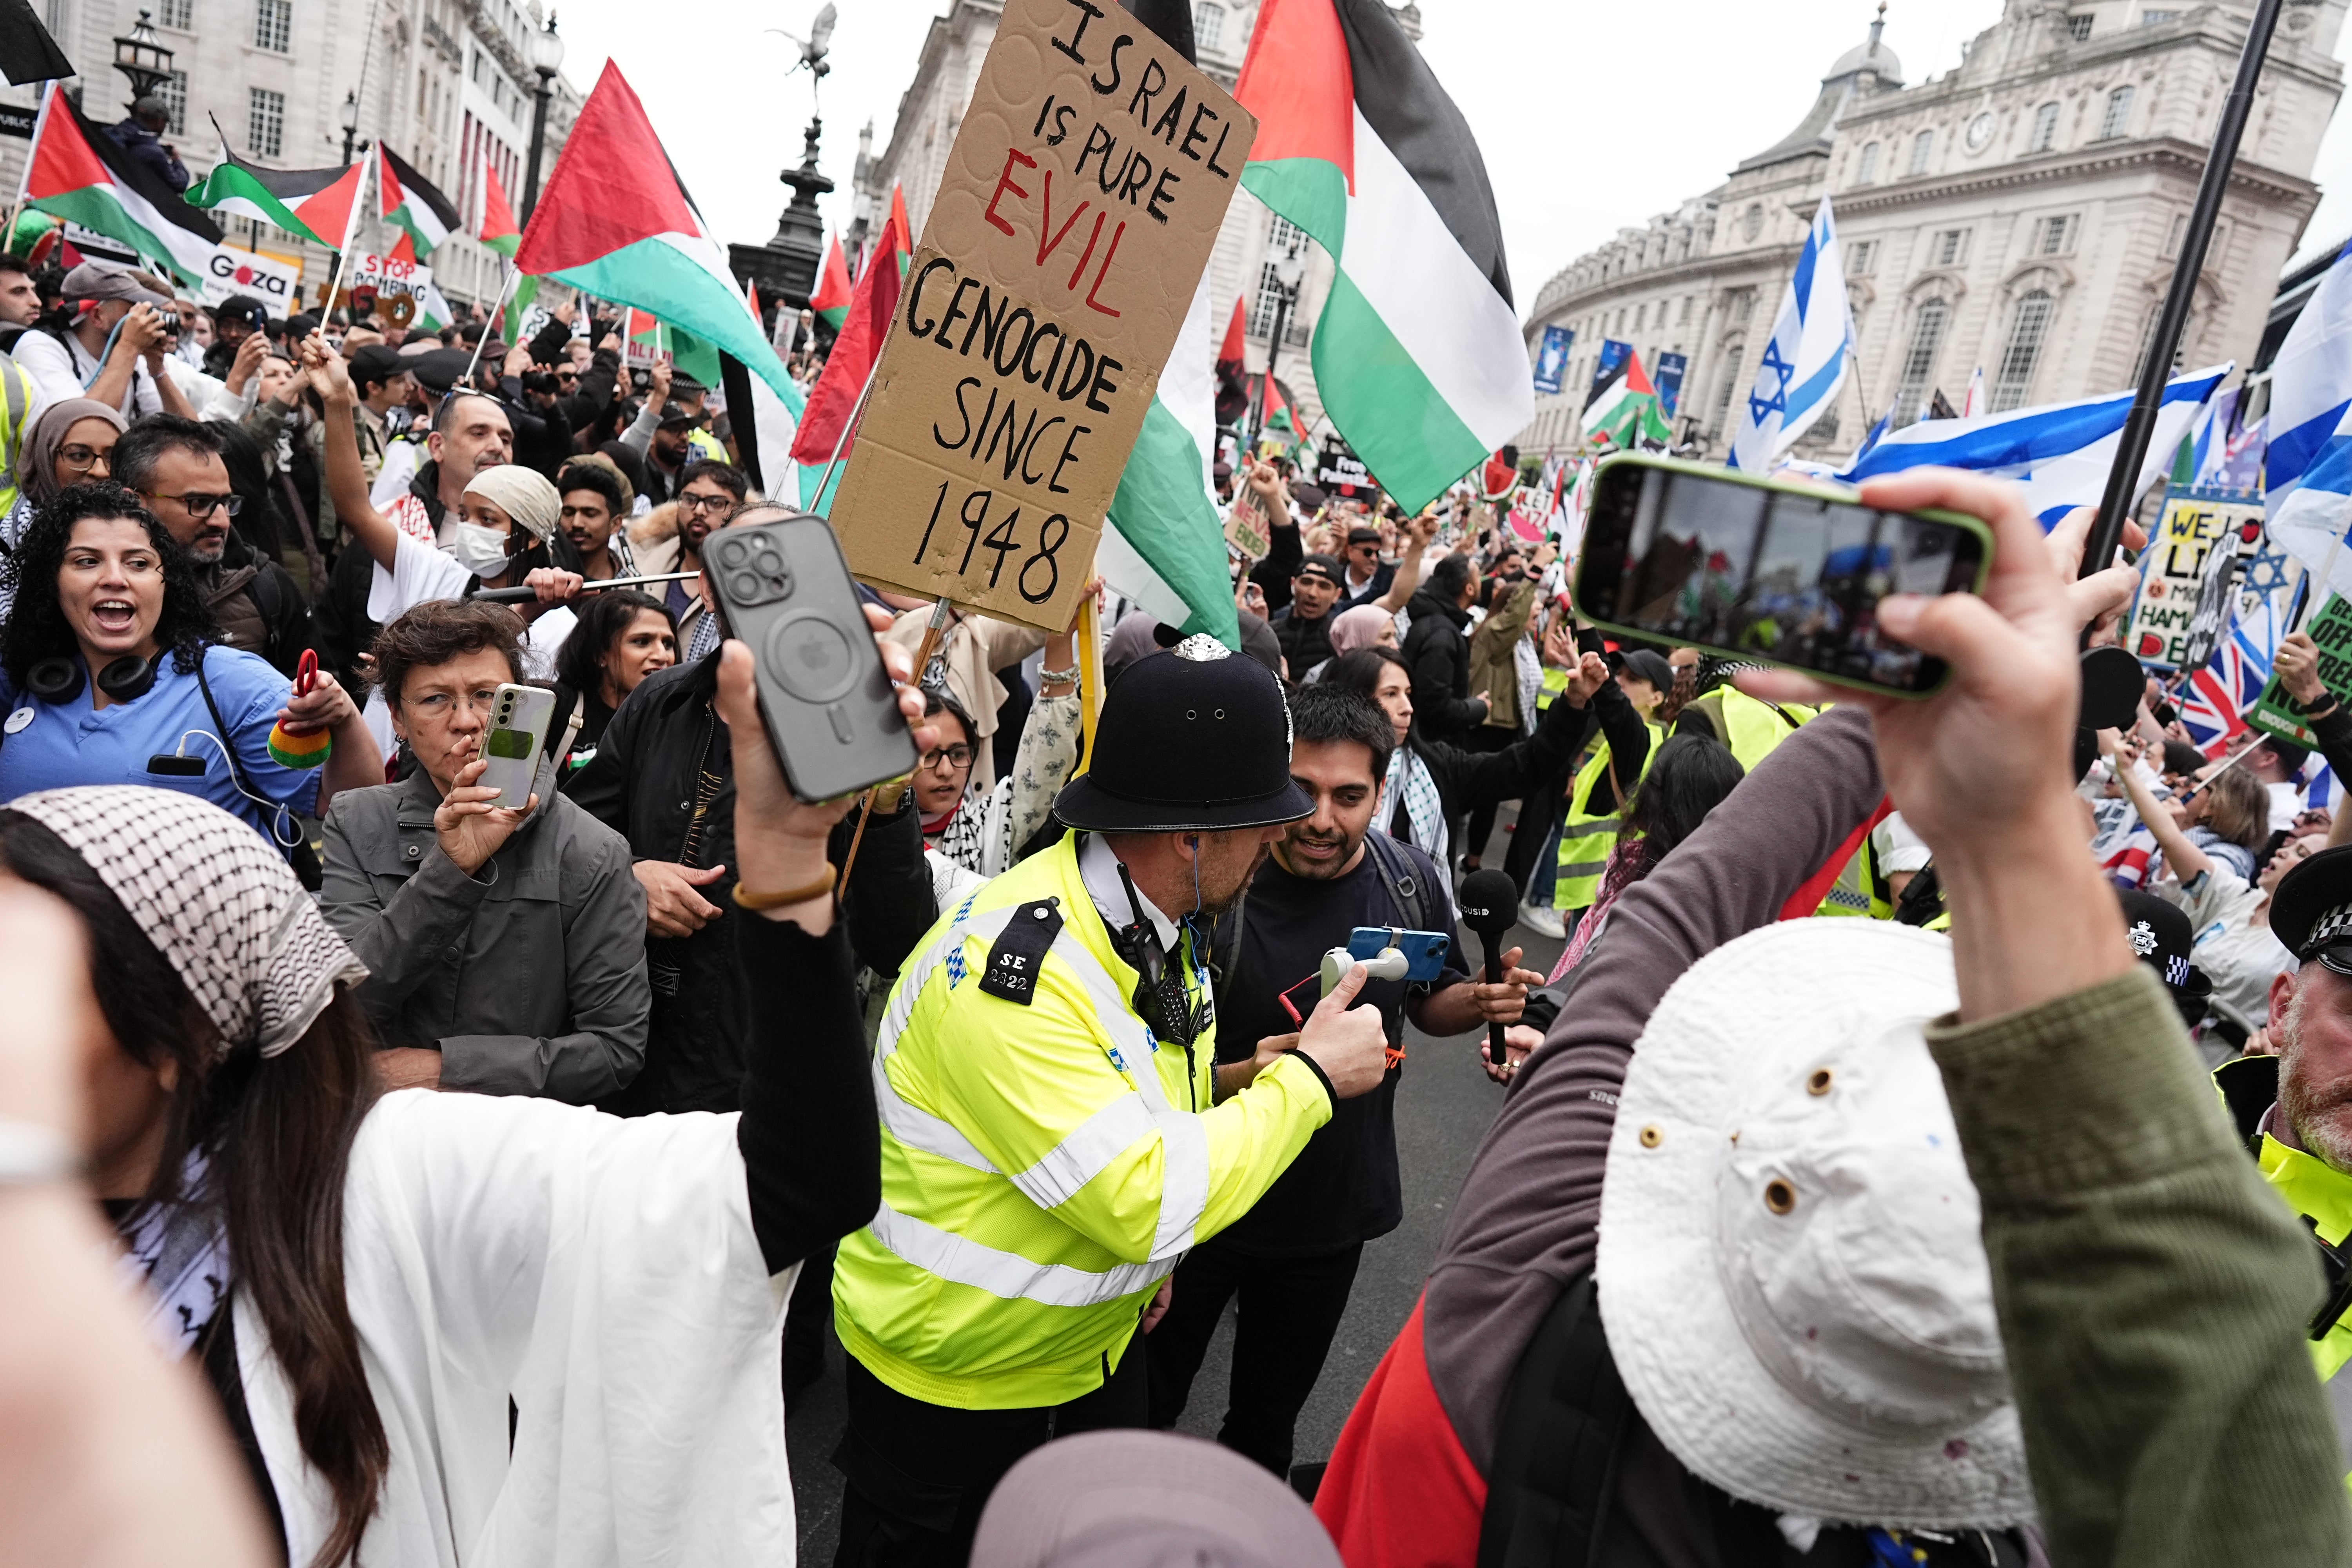 Seven arrests were made during the Palestine Solidarity Campaign (PSC) protest, the Met Police said